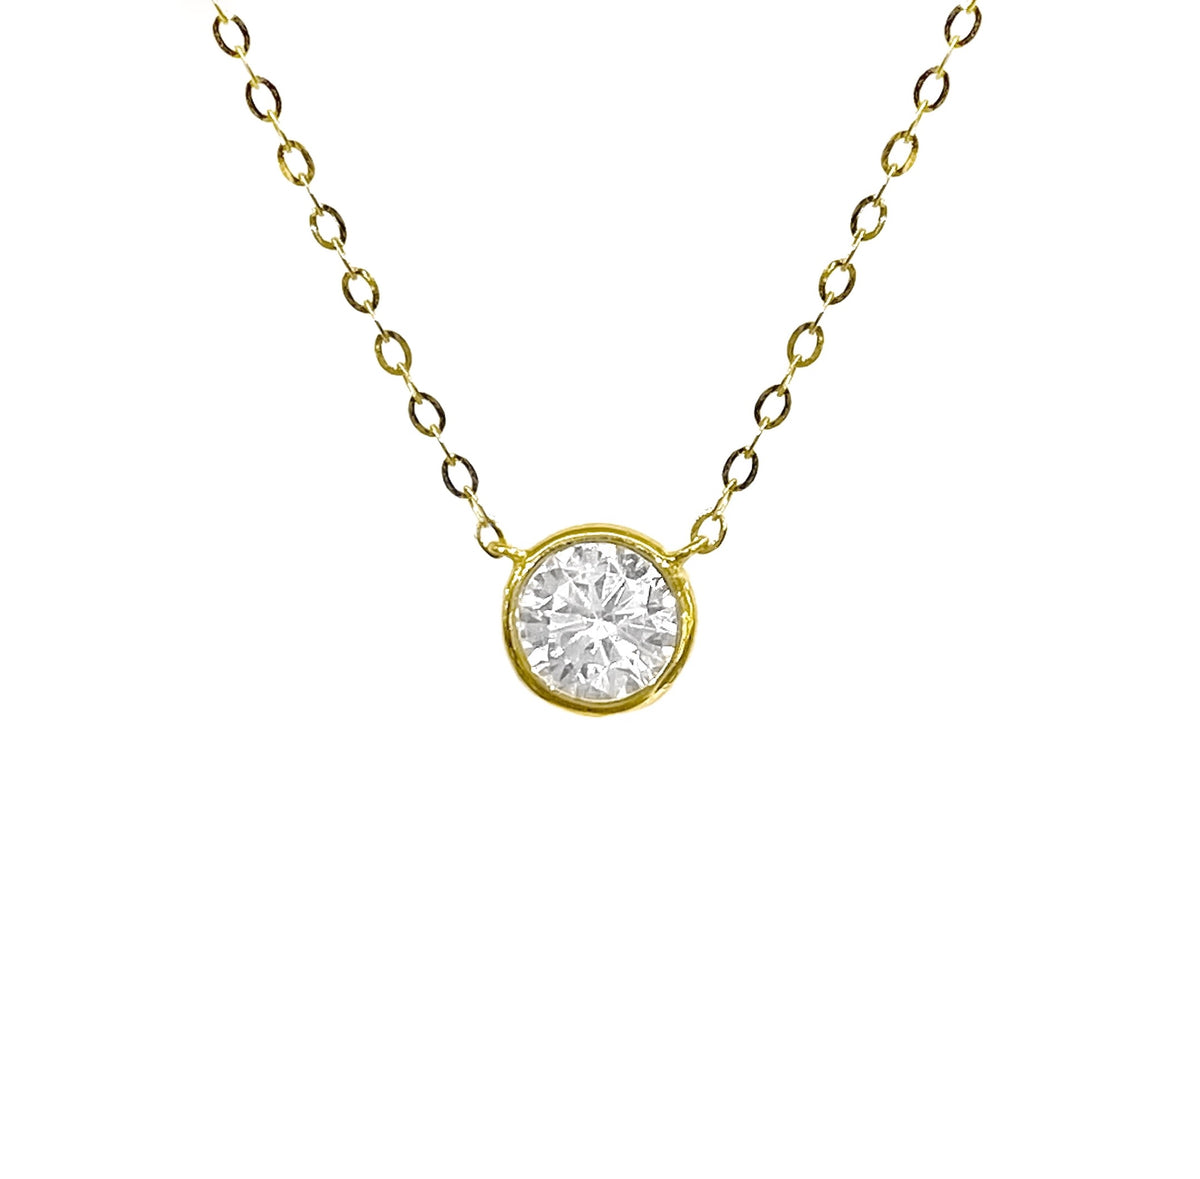 14K YELLOW GOLD FLOATING BEZEL CRYSTAL NECKLACE | Patty Q's Jewelry Inc